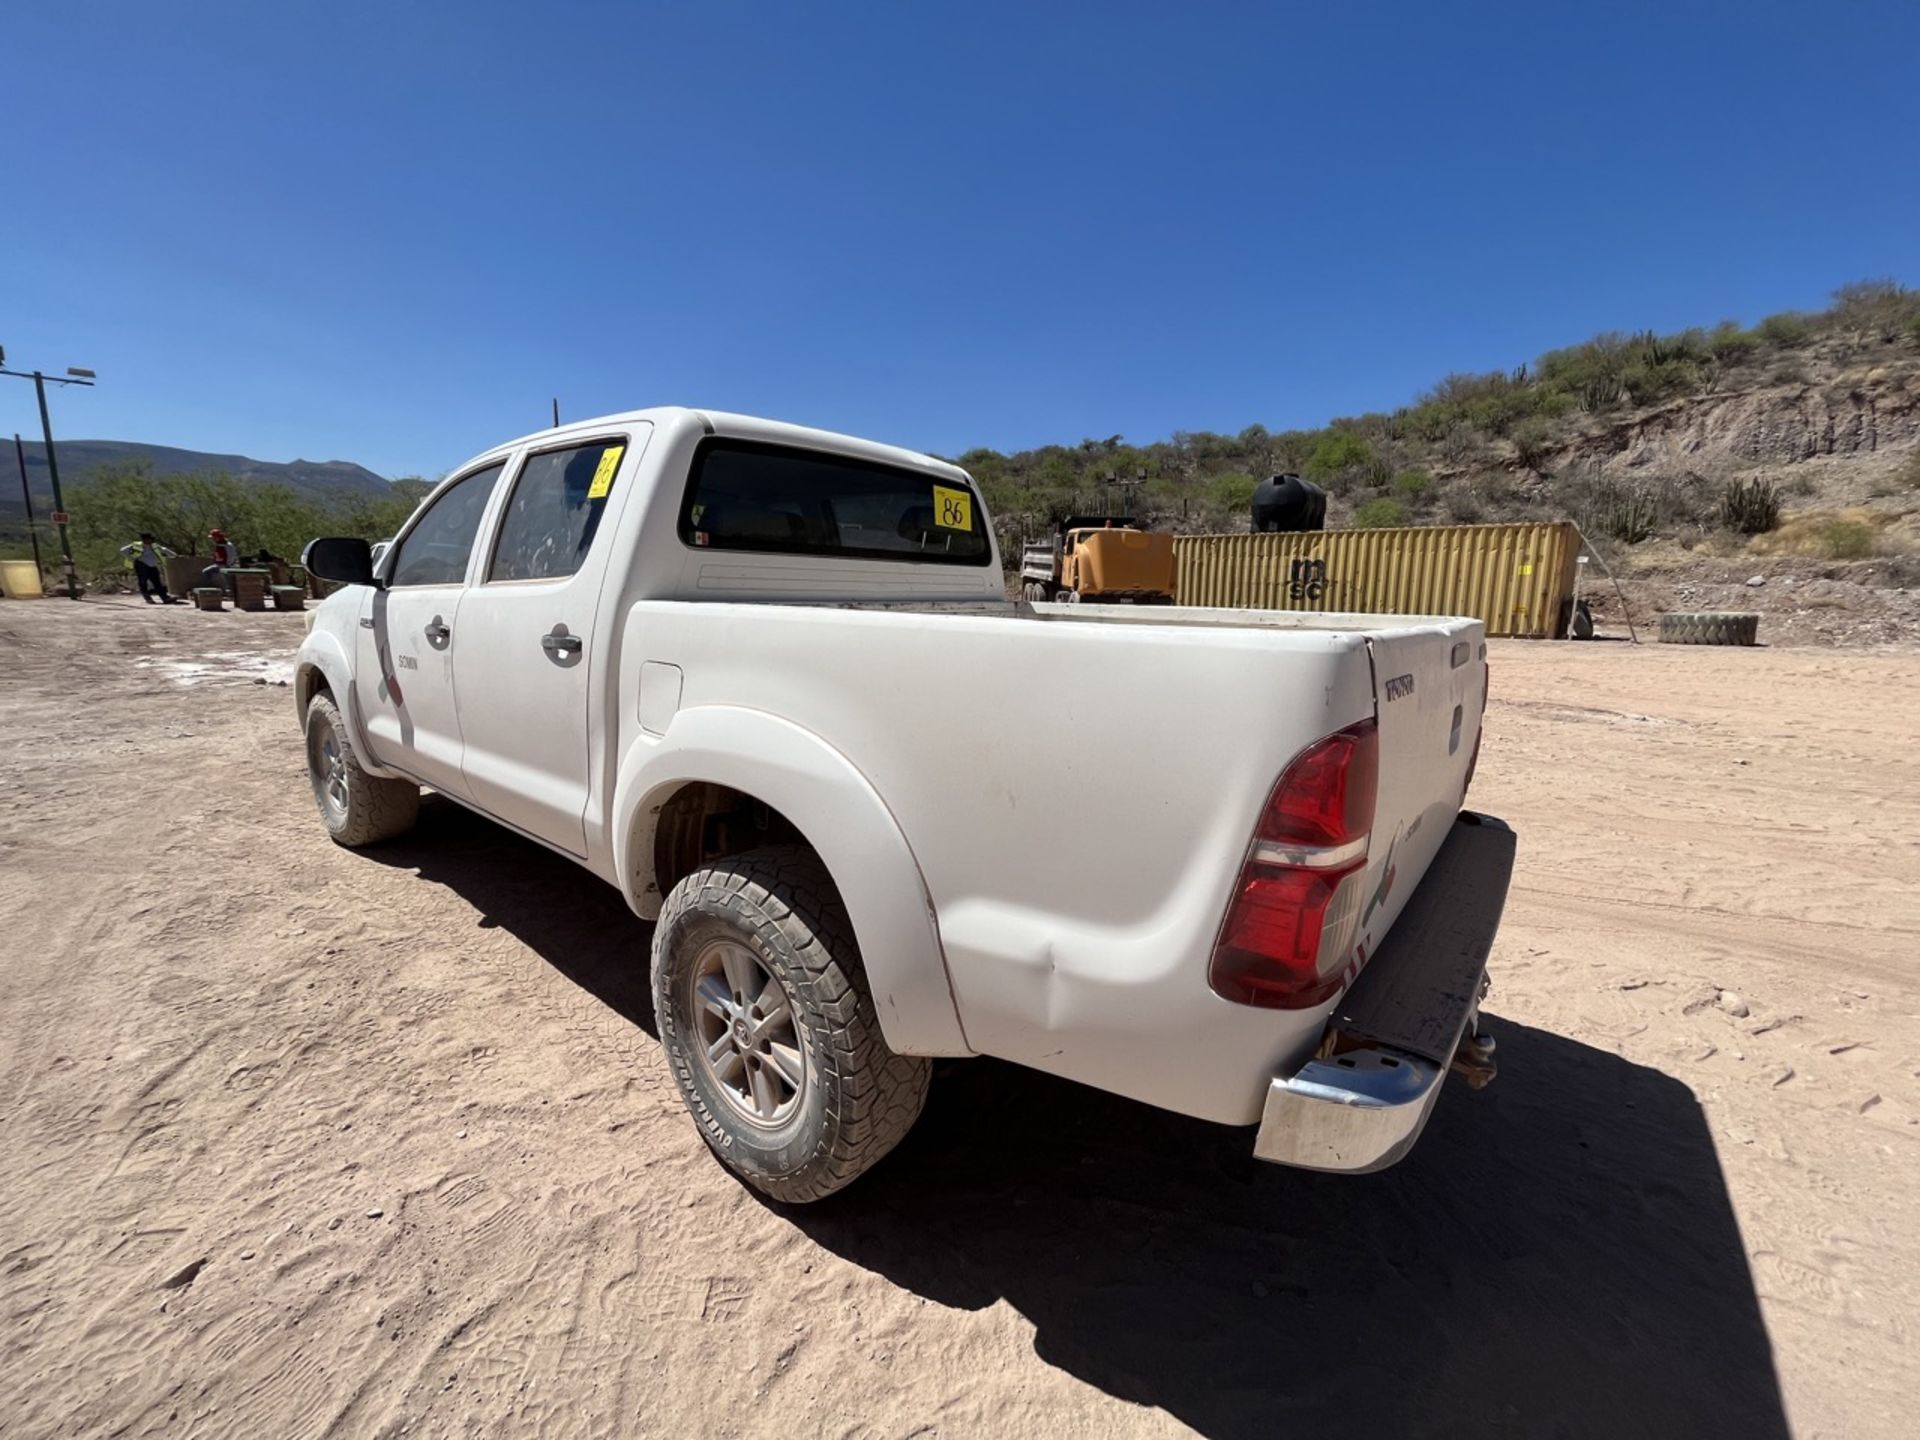 Vehicle Toyota Hilux, Pick Up Double cab white color, Serial MR0EX32G9F0263336, Model 2015, manual - Image 4 of 42